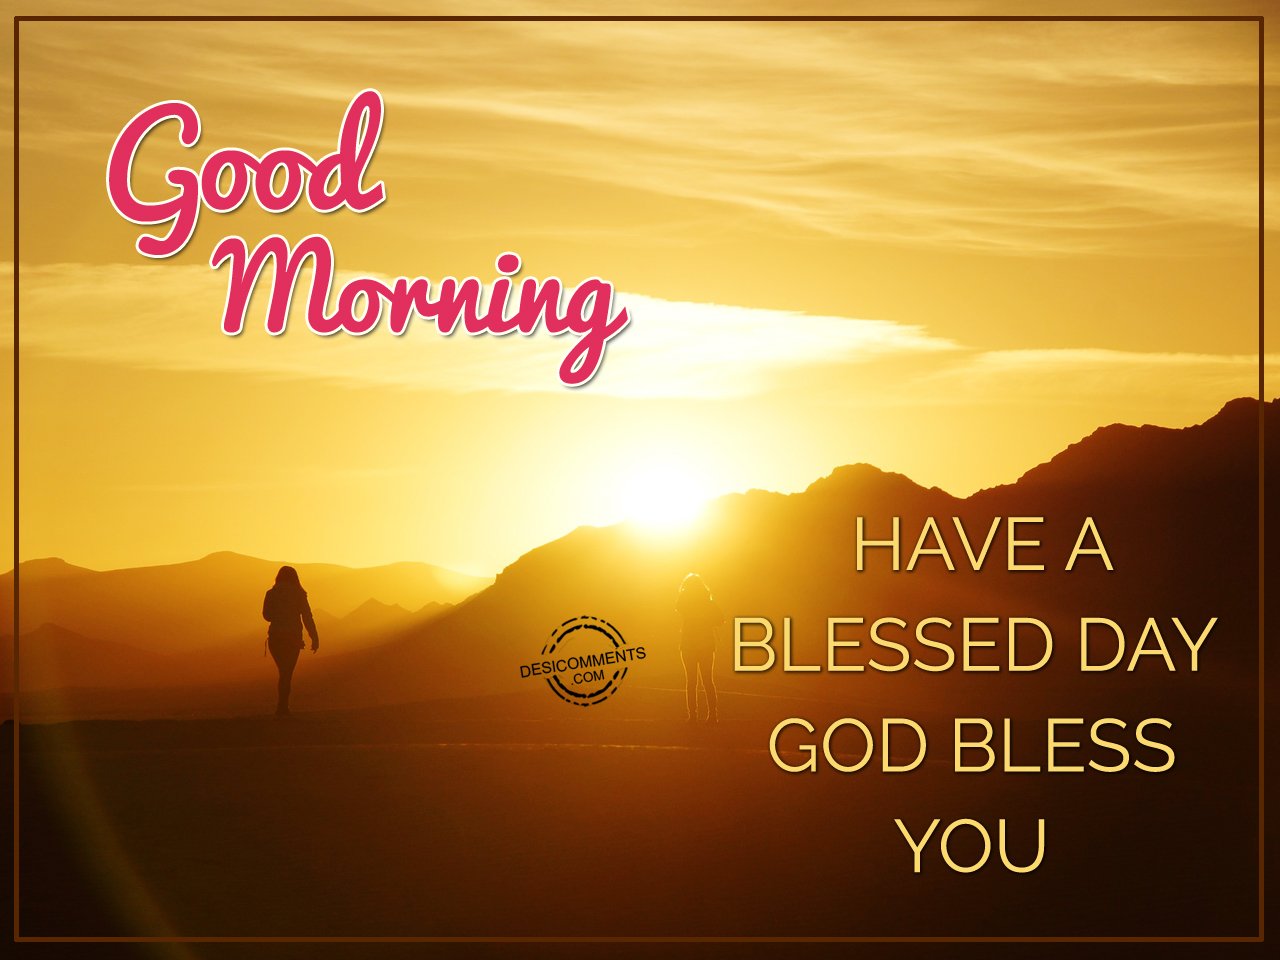 Have A Blessed Day God Bless You - Good Morning.